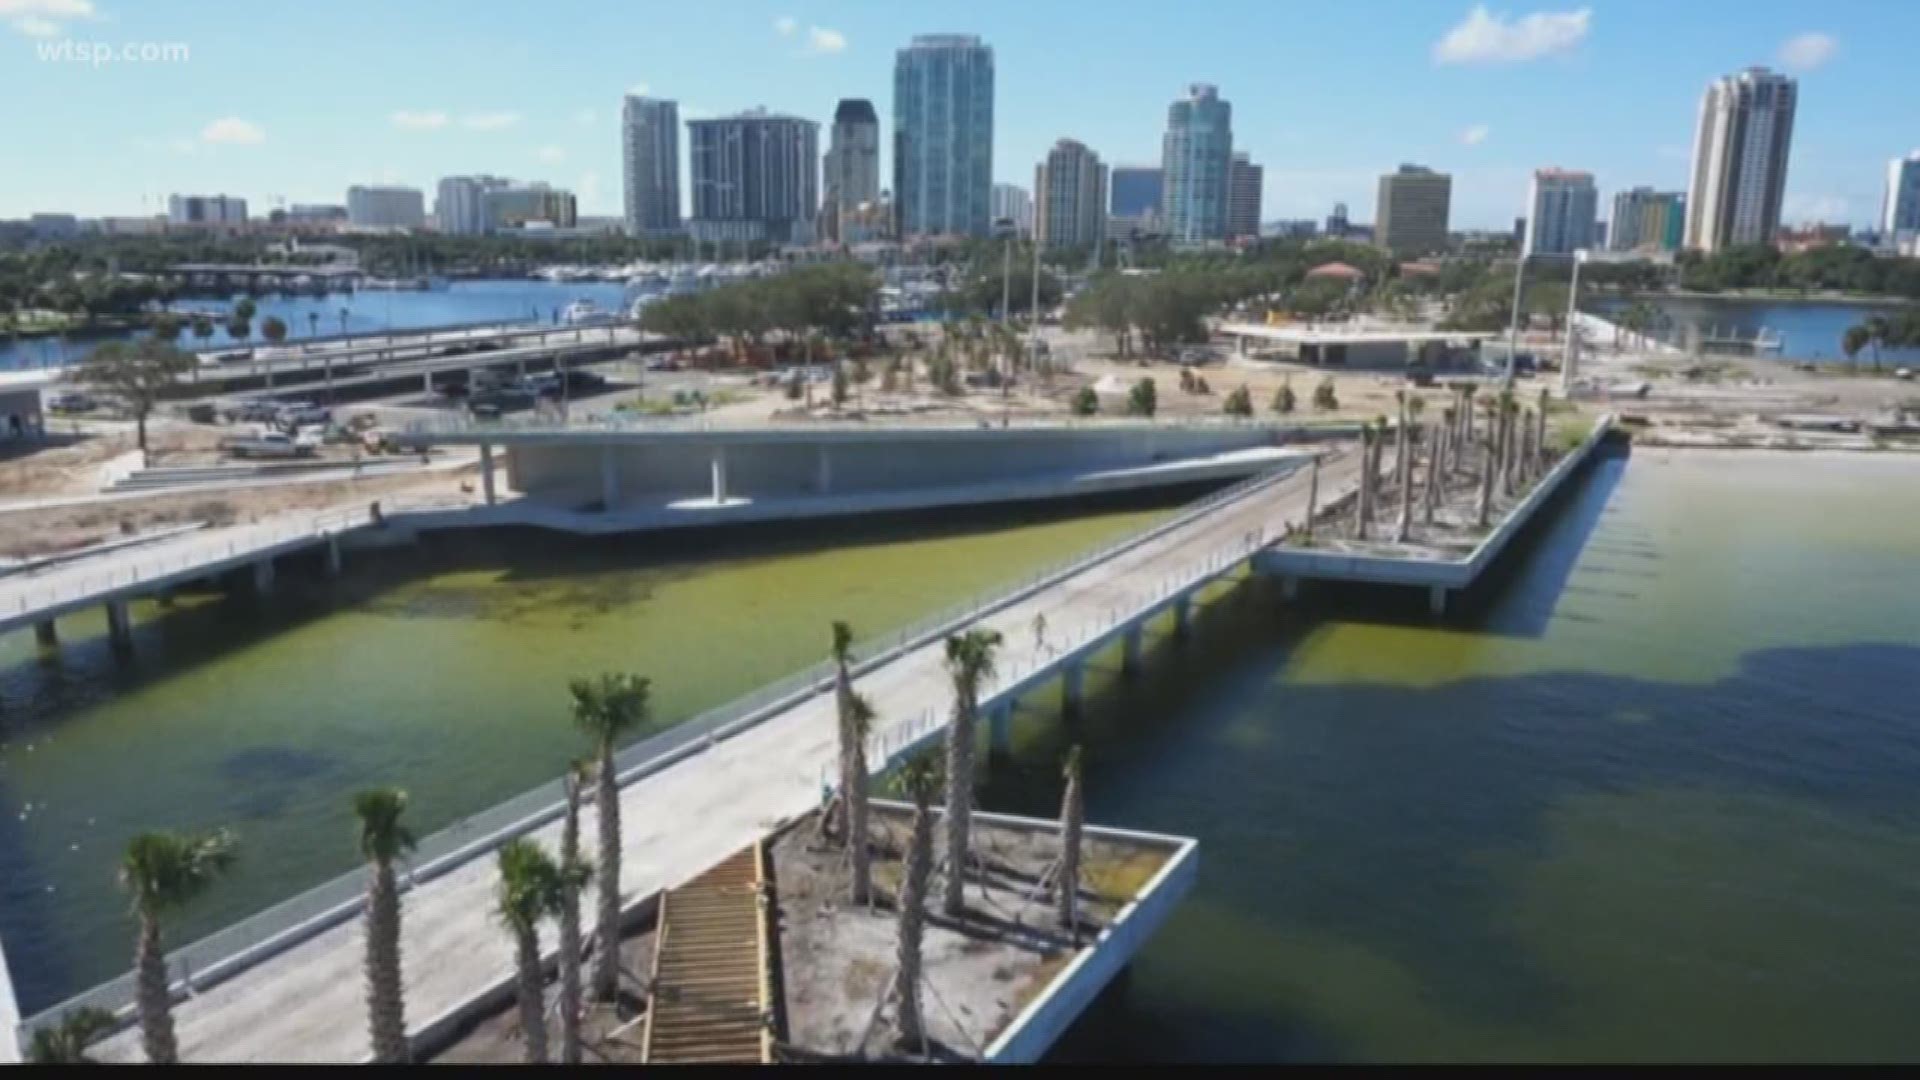 The St. Pete pier is scheduled to open next spring.